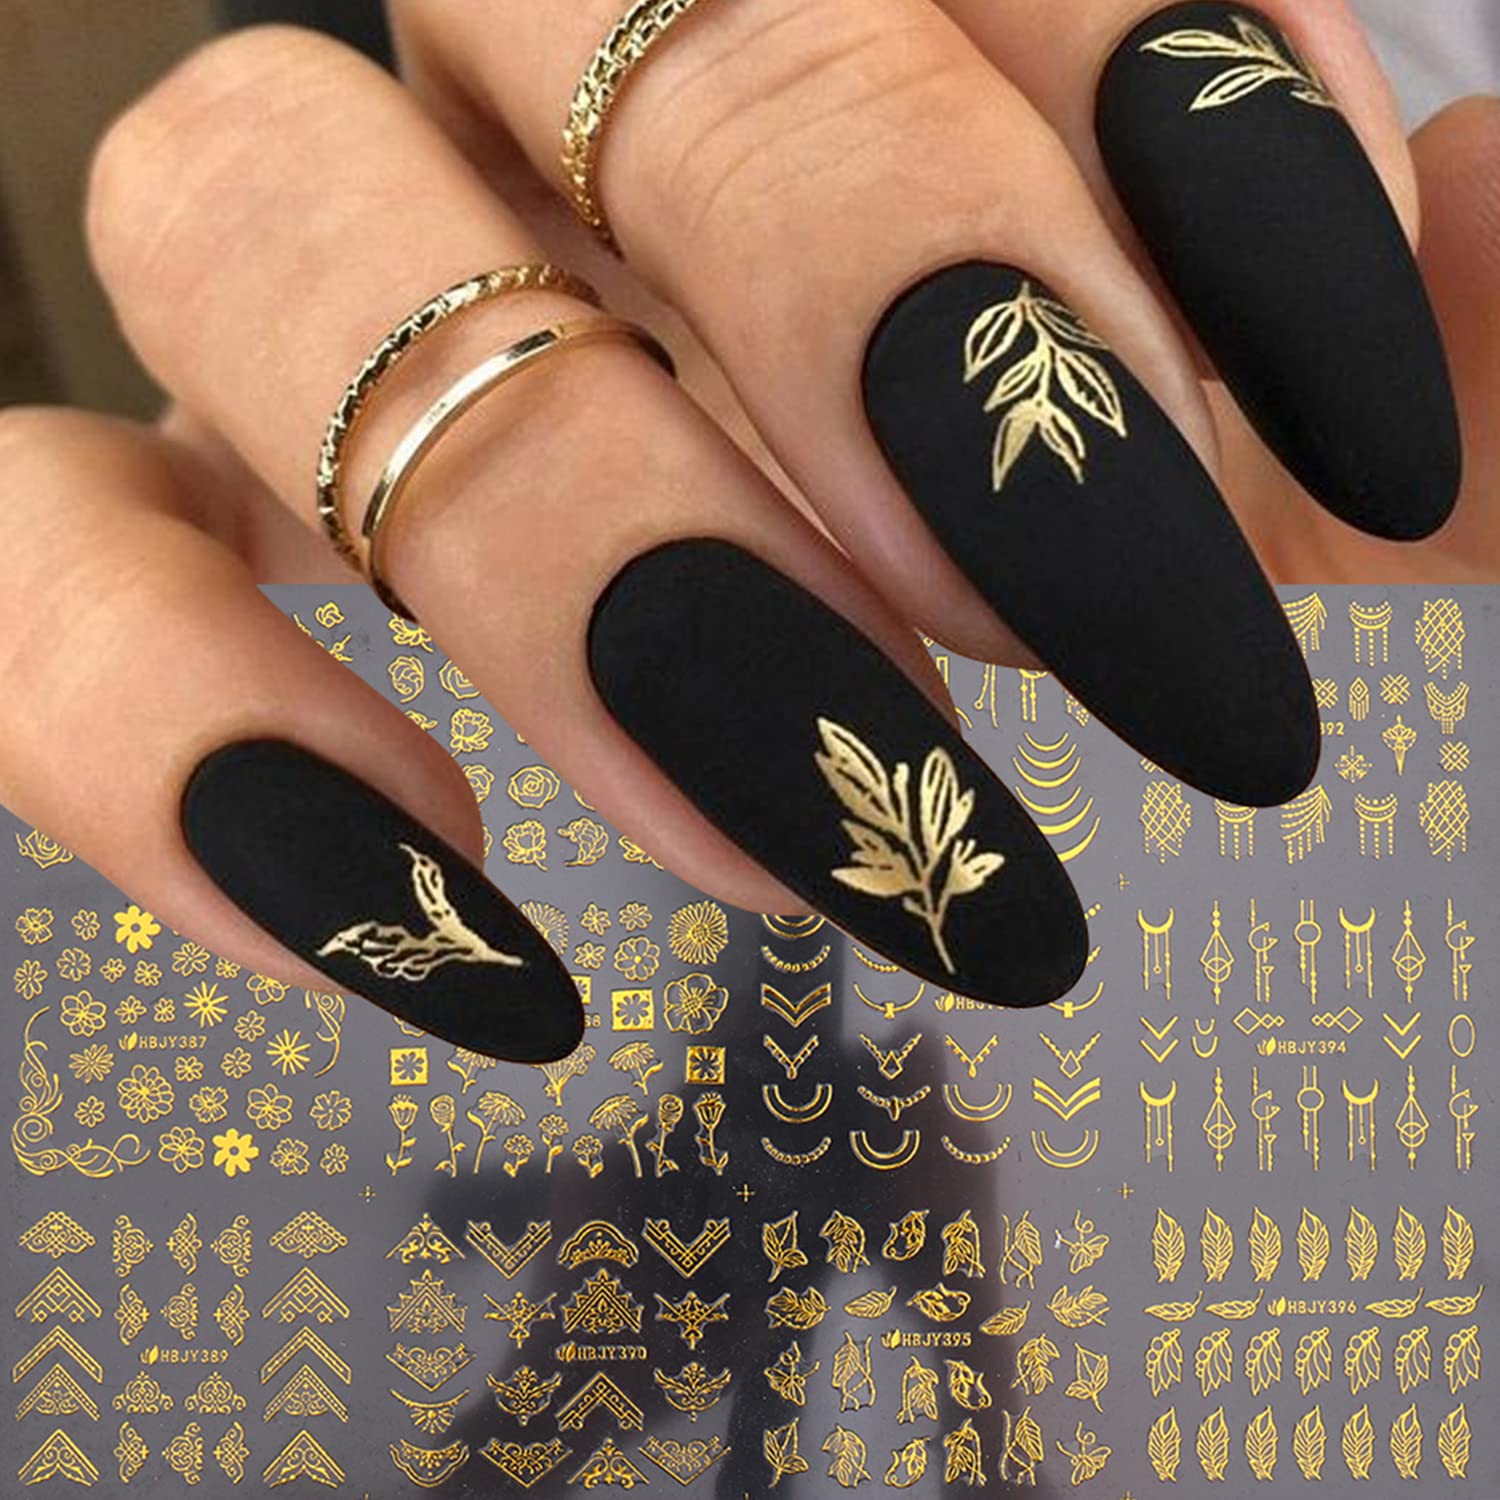 1 Sheet Nail Art Stickers Black Gold White Butterfly Design Adhesive Nail  Art Decorations Flowers Nail Sticker Decals - Etsy